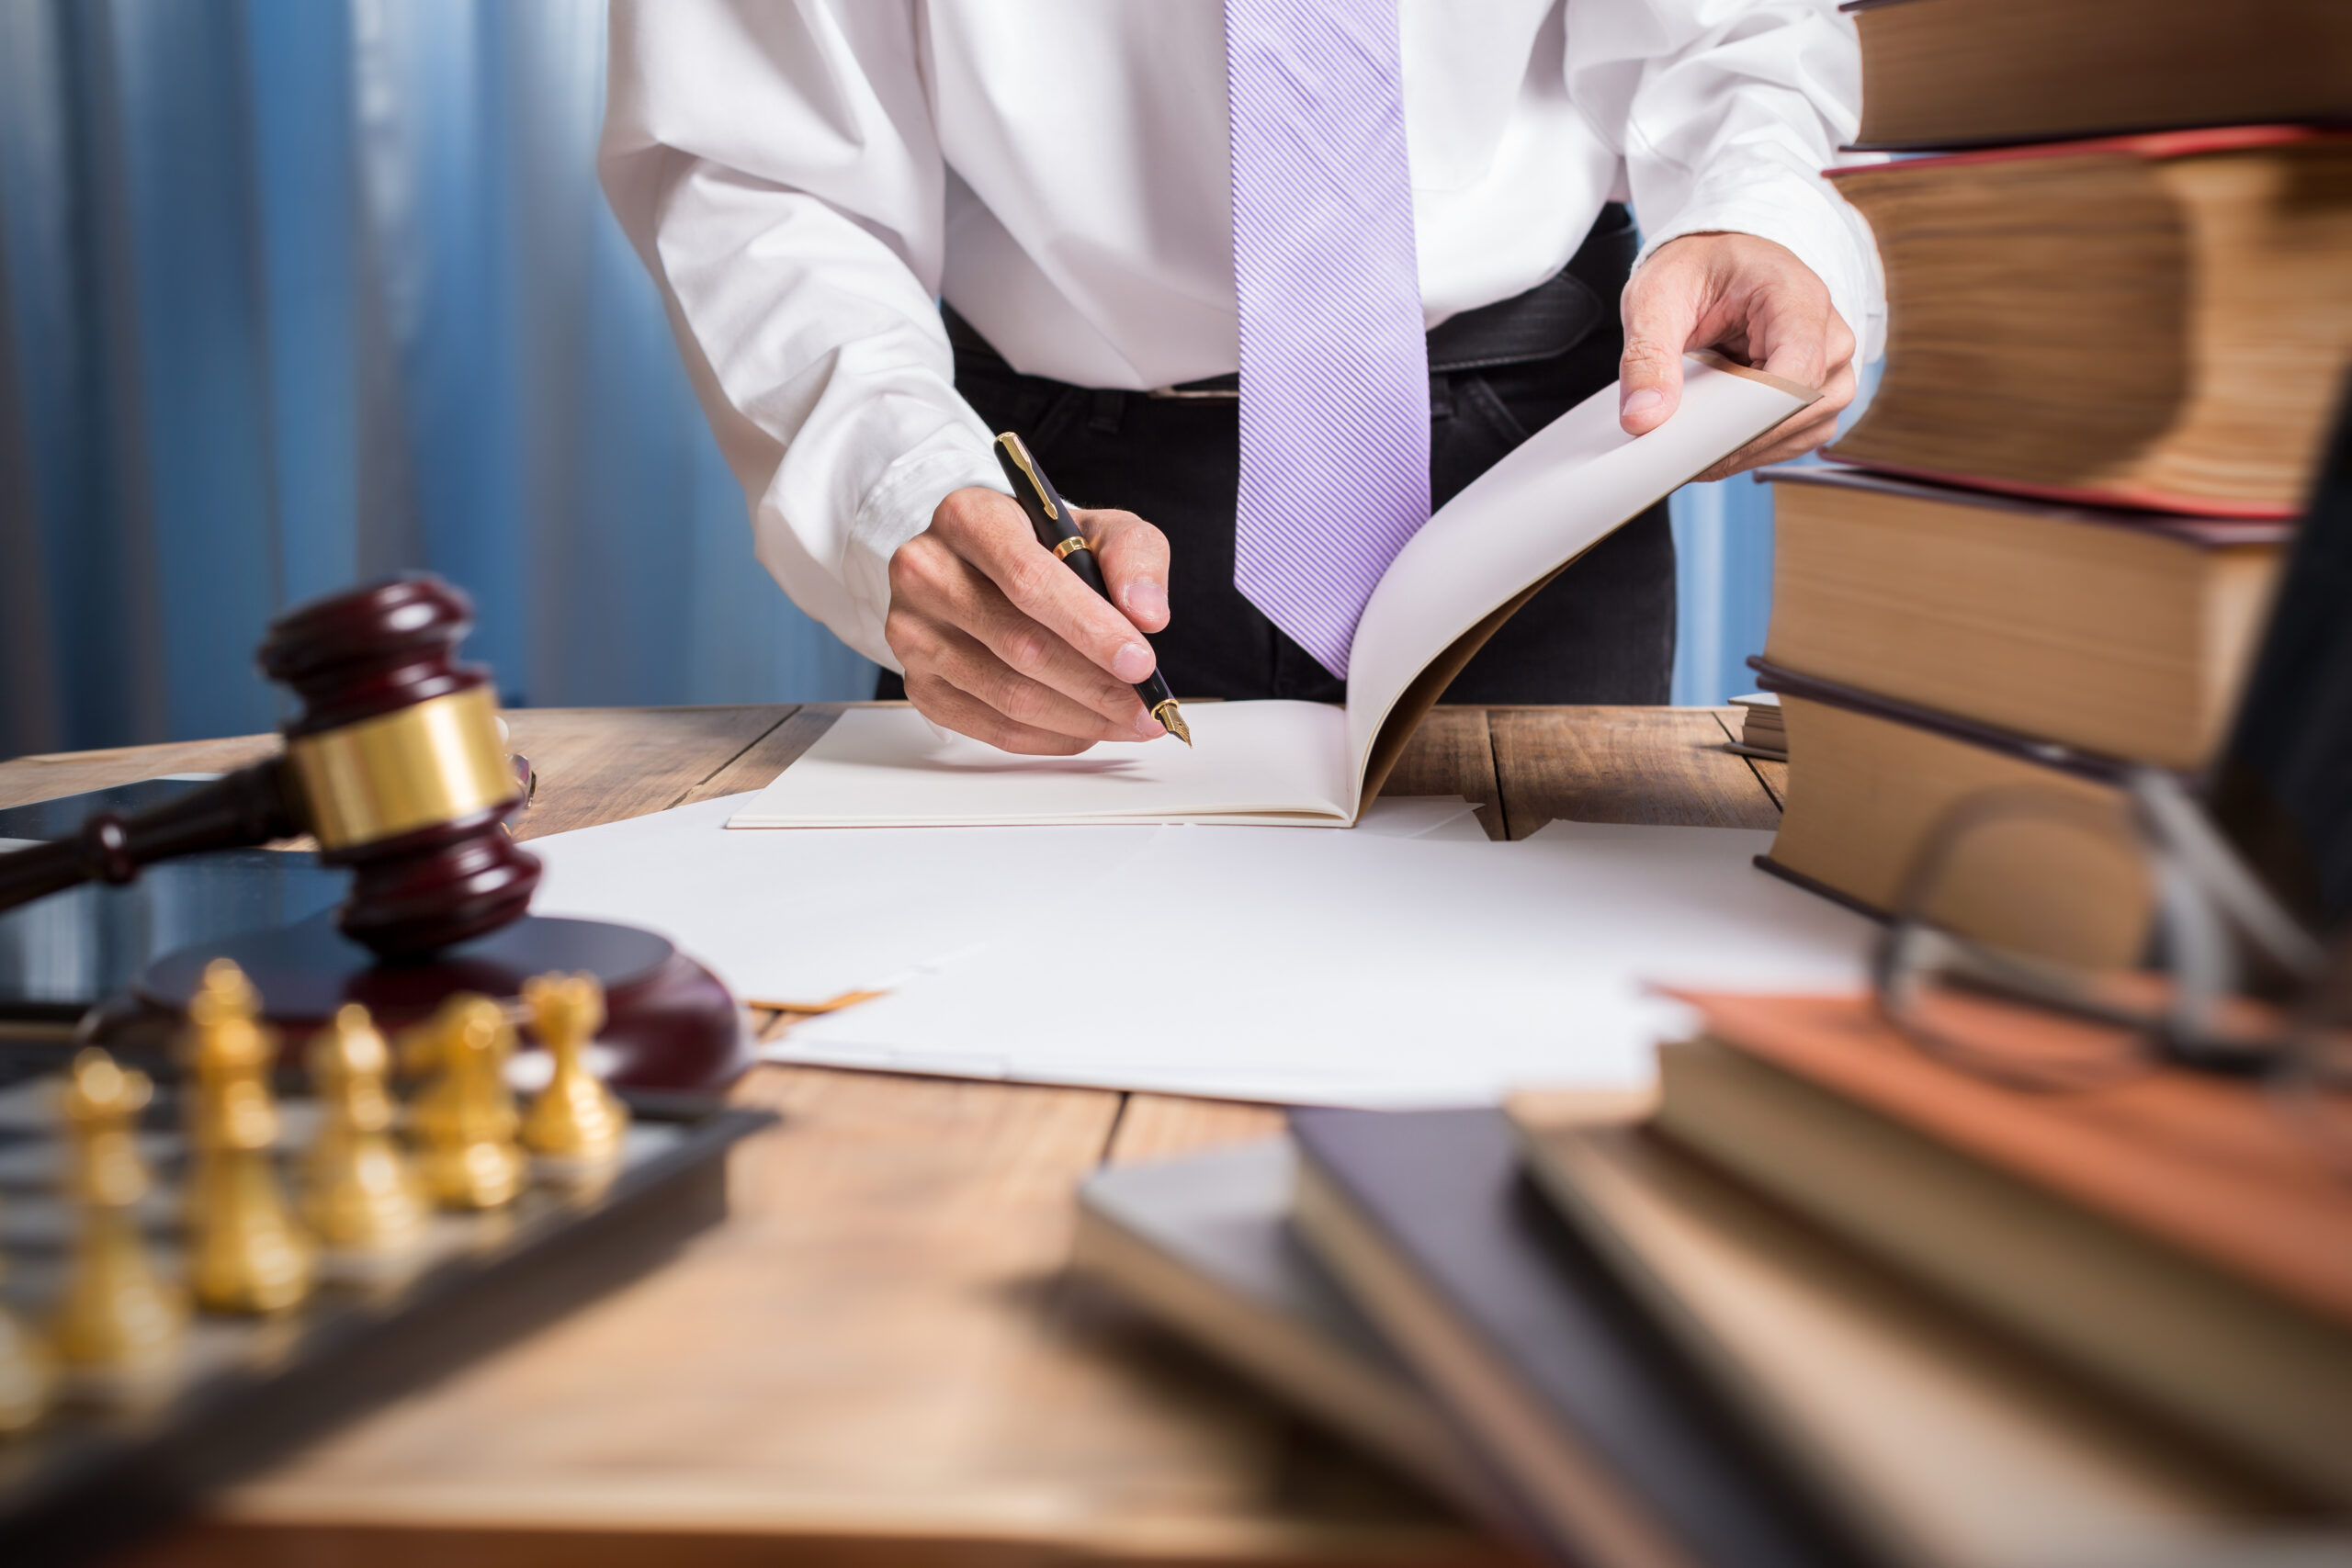 Finding the Right ACS Lawyer: What to Look For and How to Choose Wisely